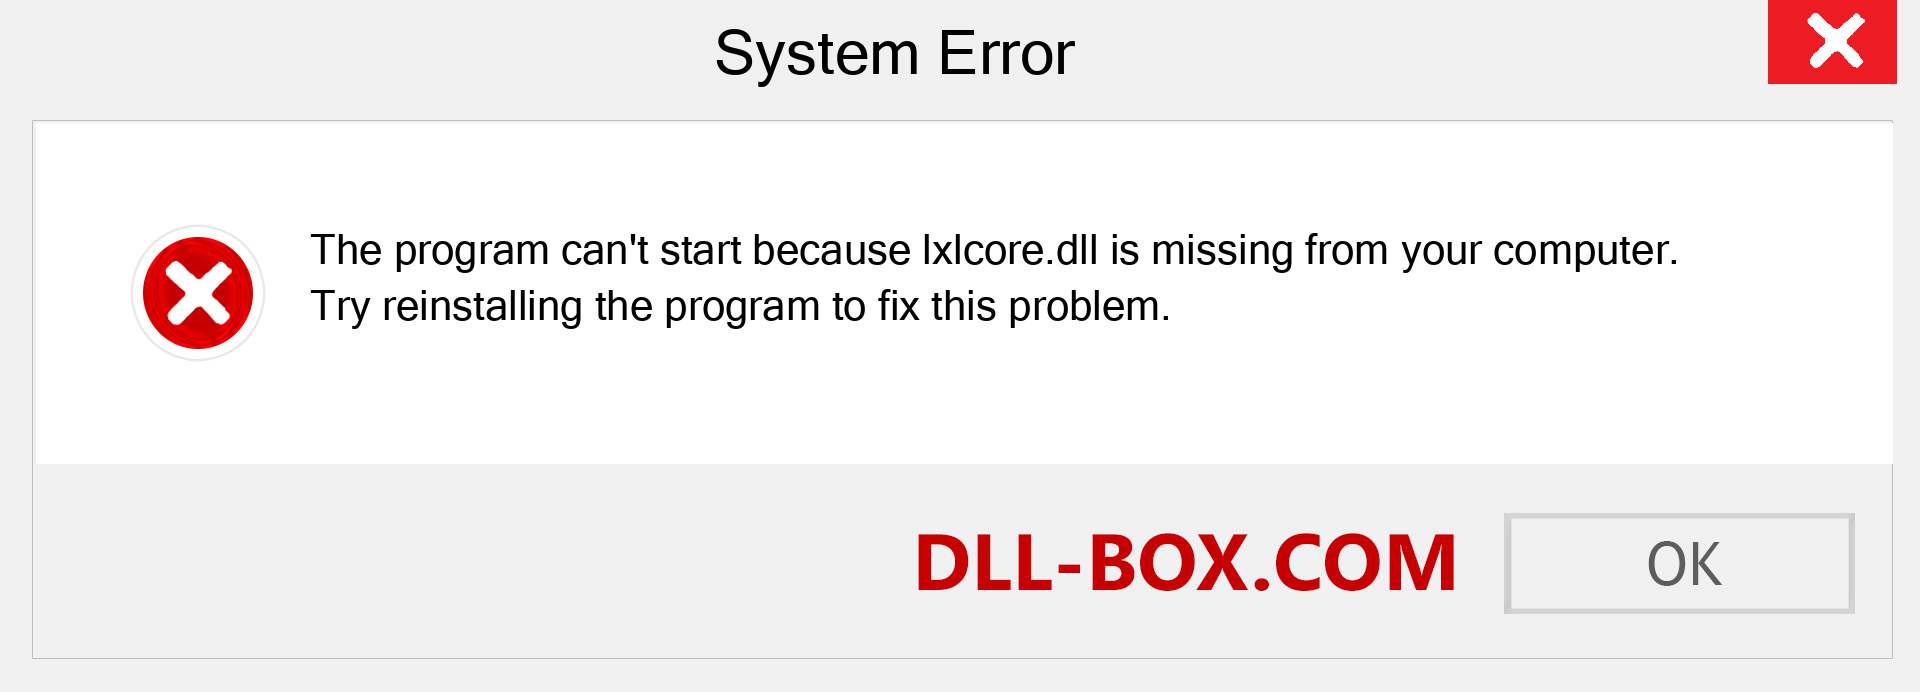  lxlcore.dll file is missing?. Download for Windows 7, 8, 10 - Fix  lxlcore dll Missing Error on Windows, photos, images